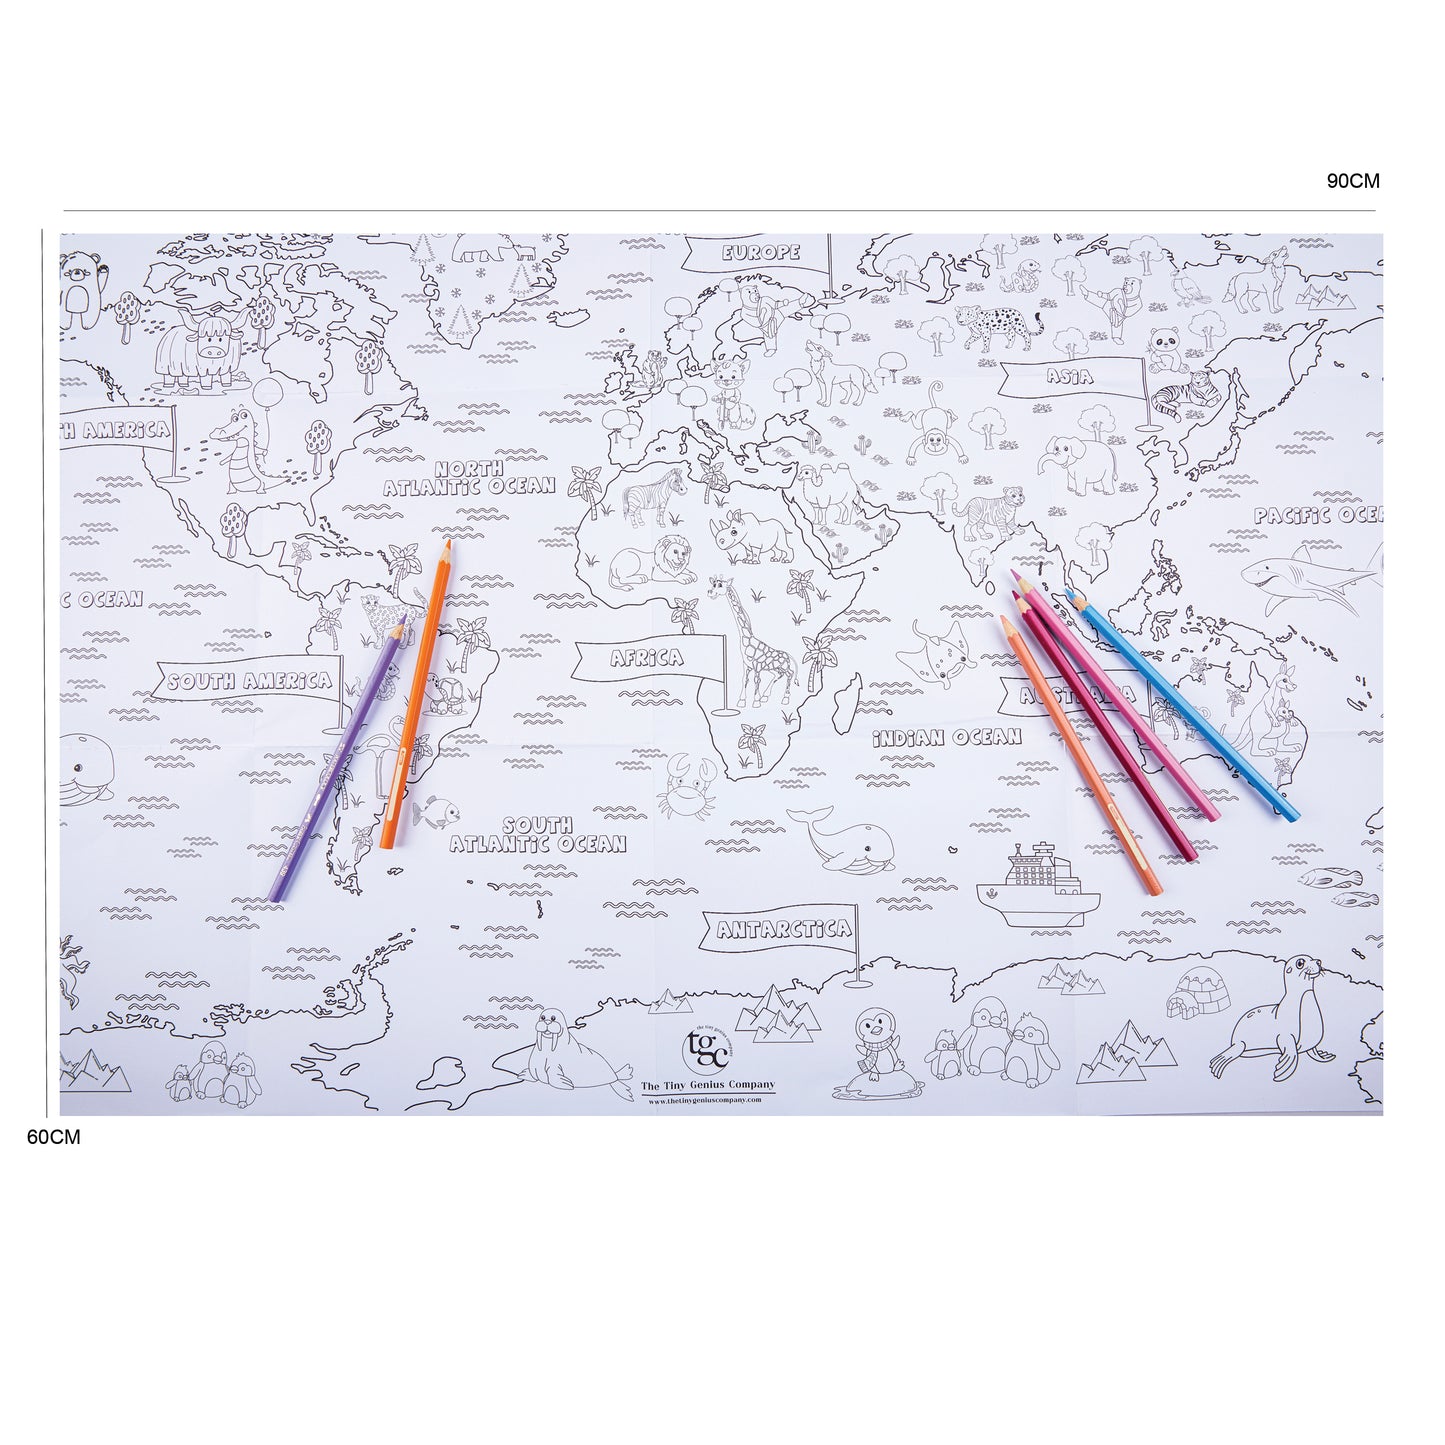 The World Map Colouring Poster